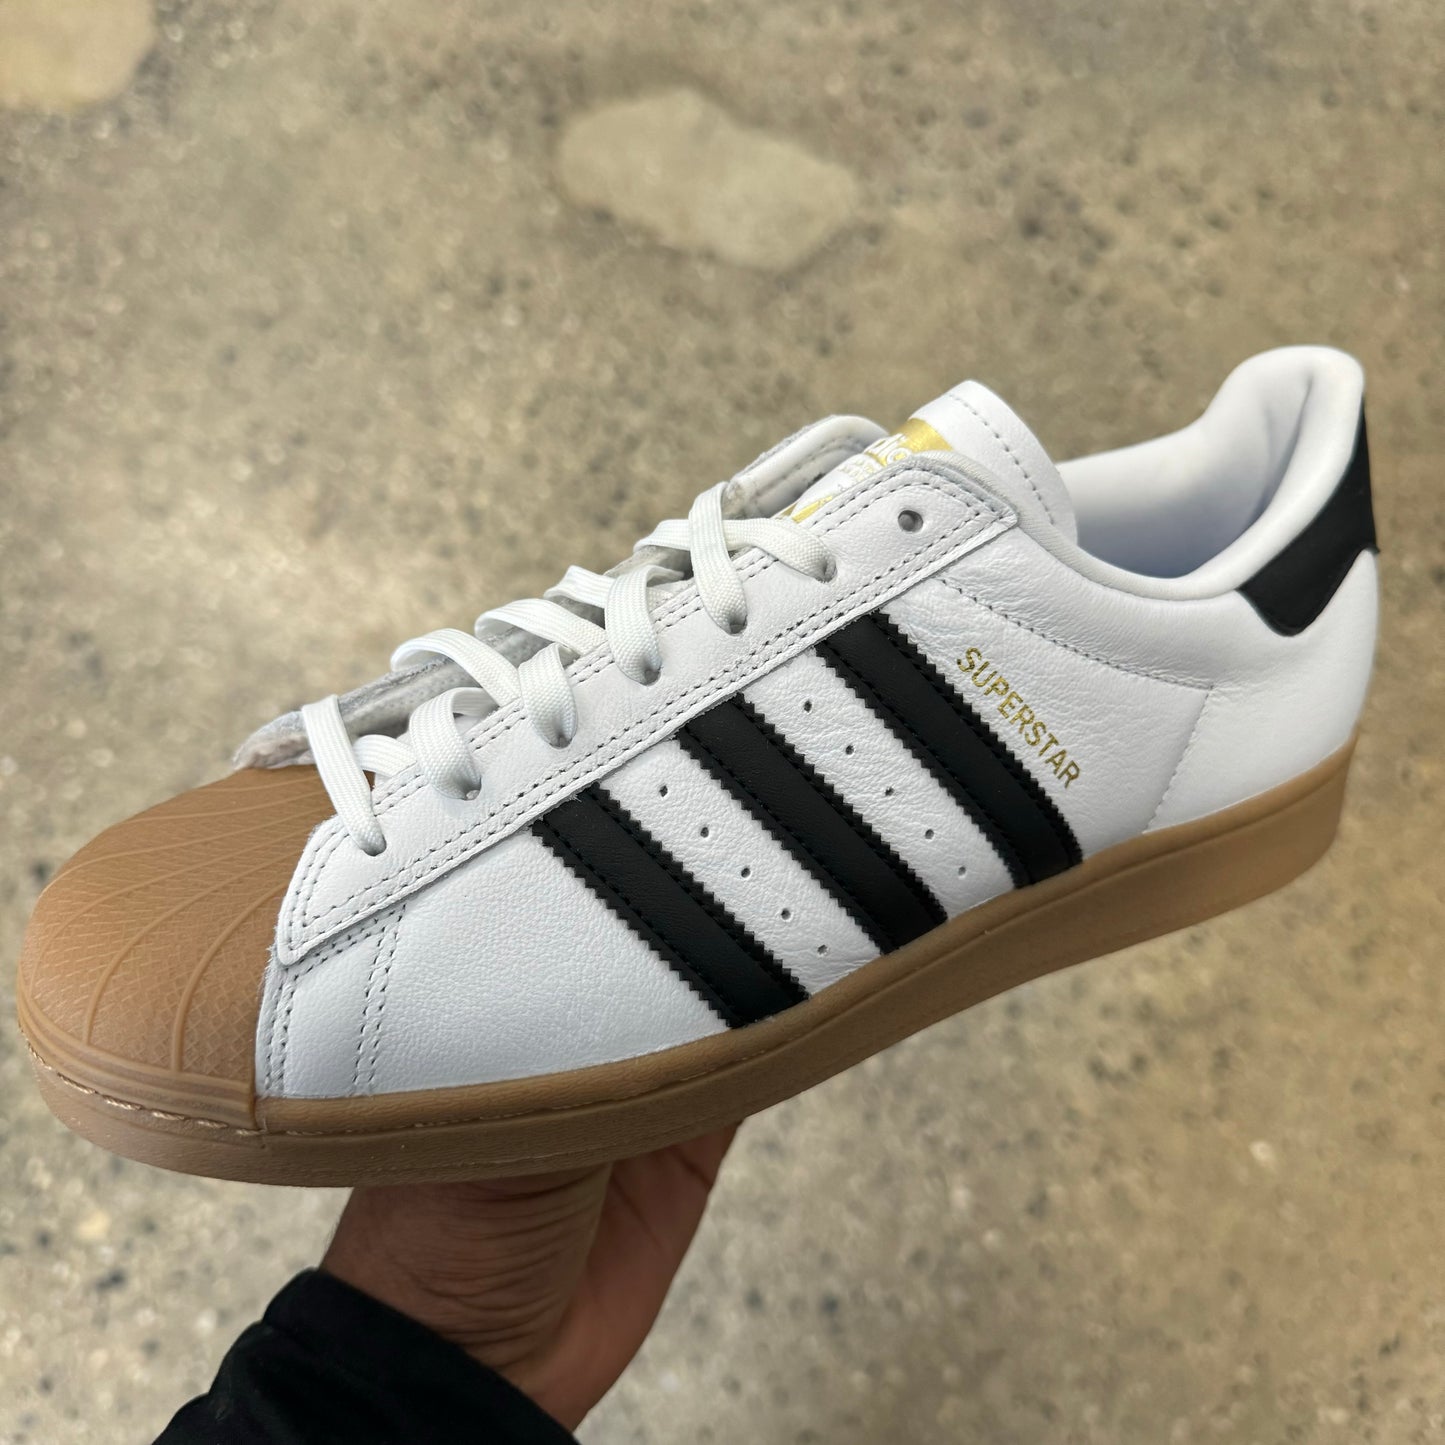 white leather sneaker with black stripes, gum toe and sole, side view